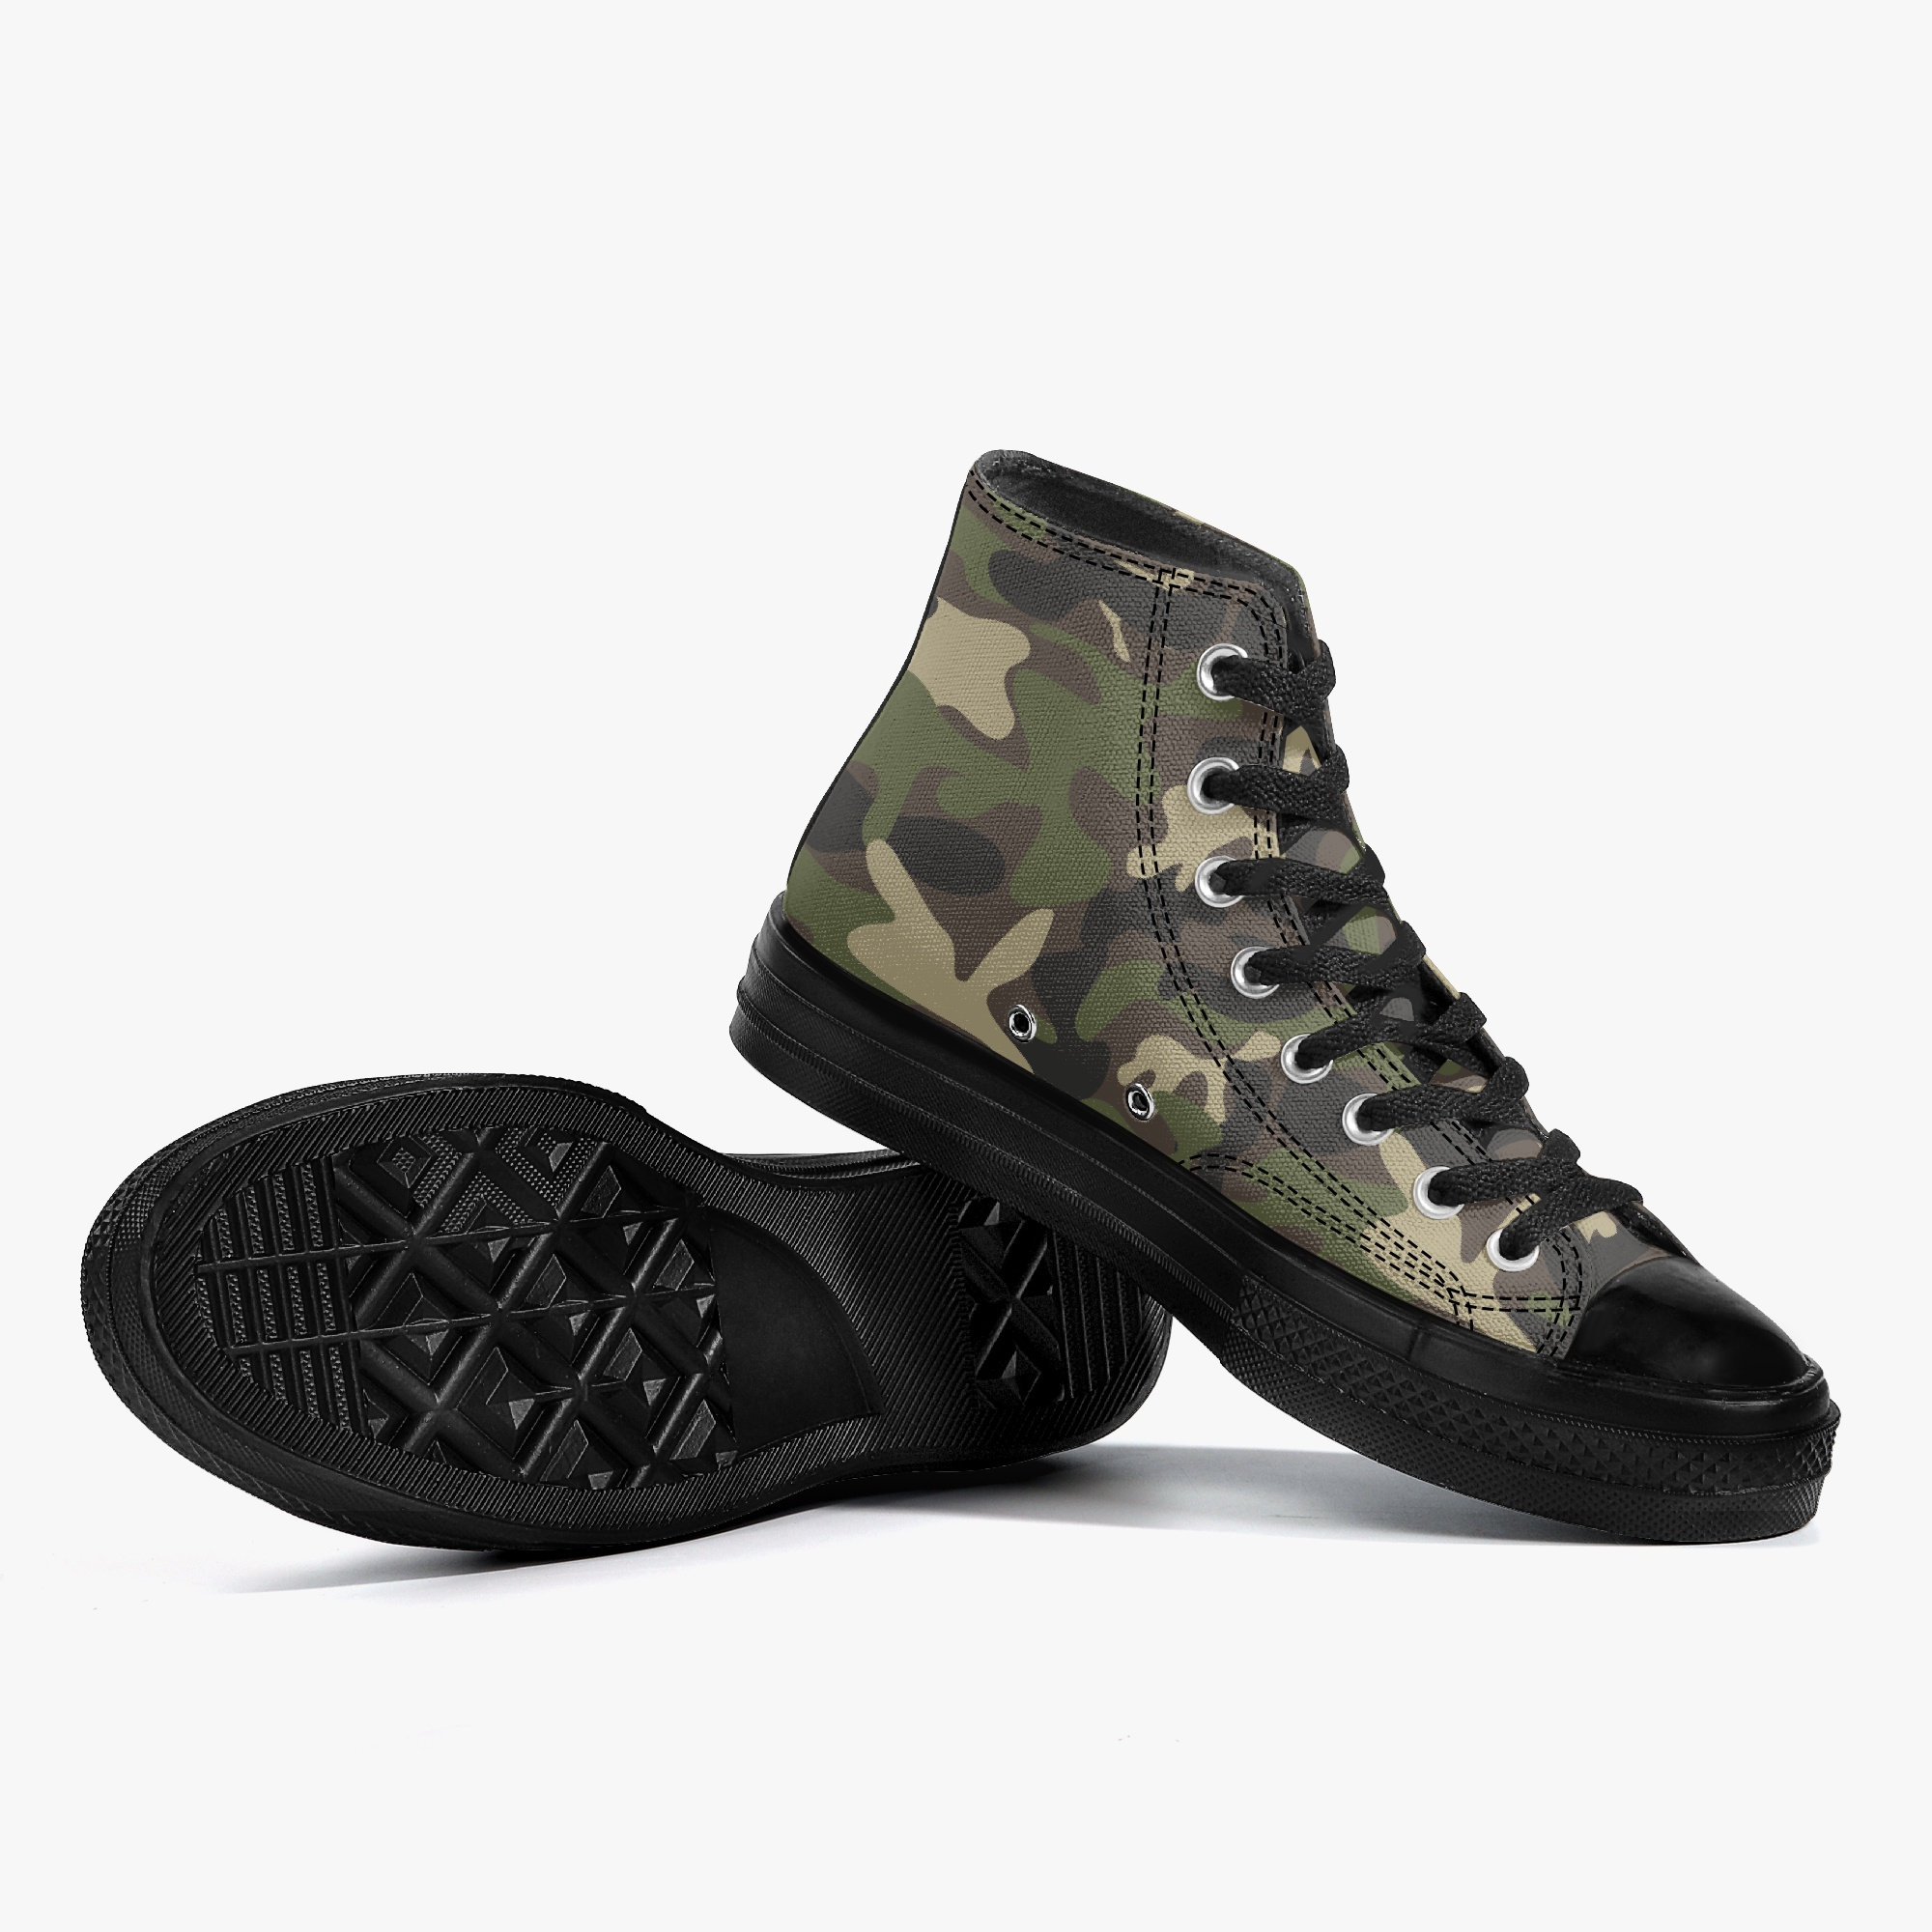 CONVERSE Cons Digi Camo One Star Pro Shoes | CoolSprings Galleria